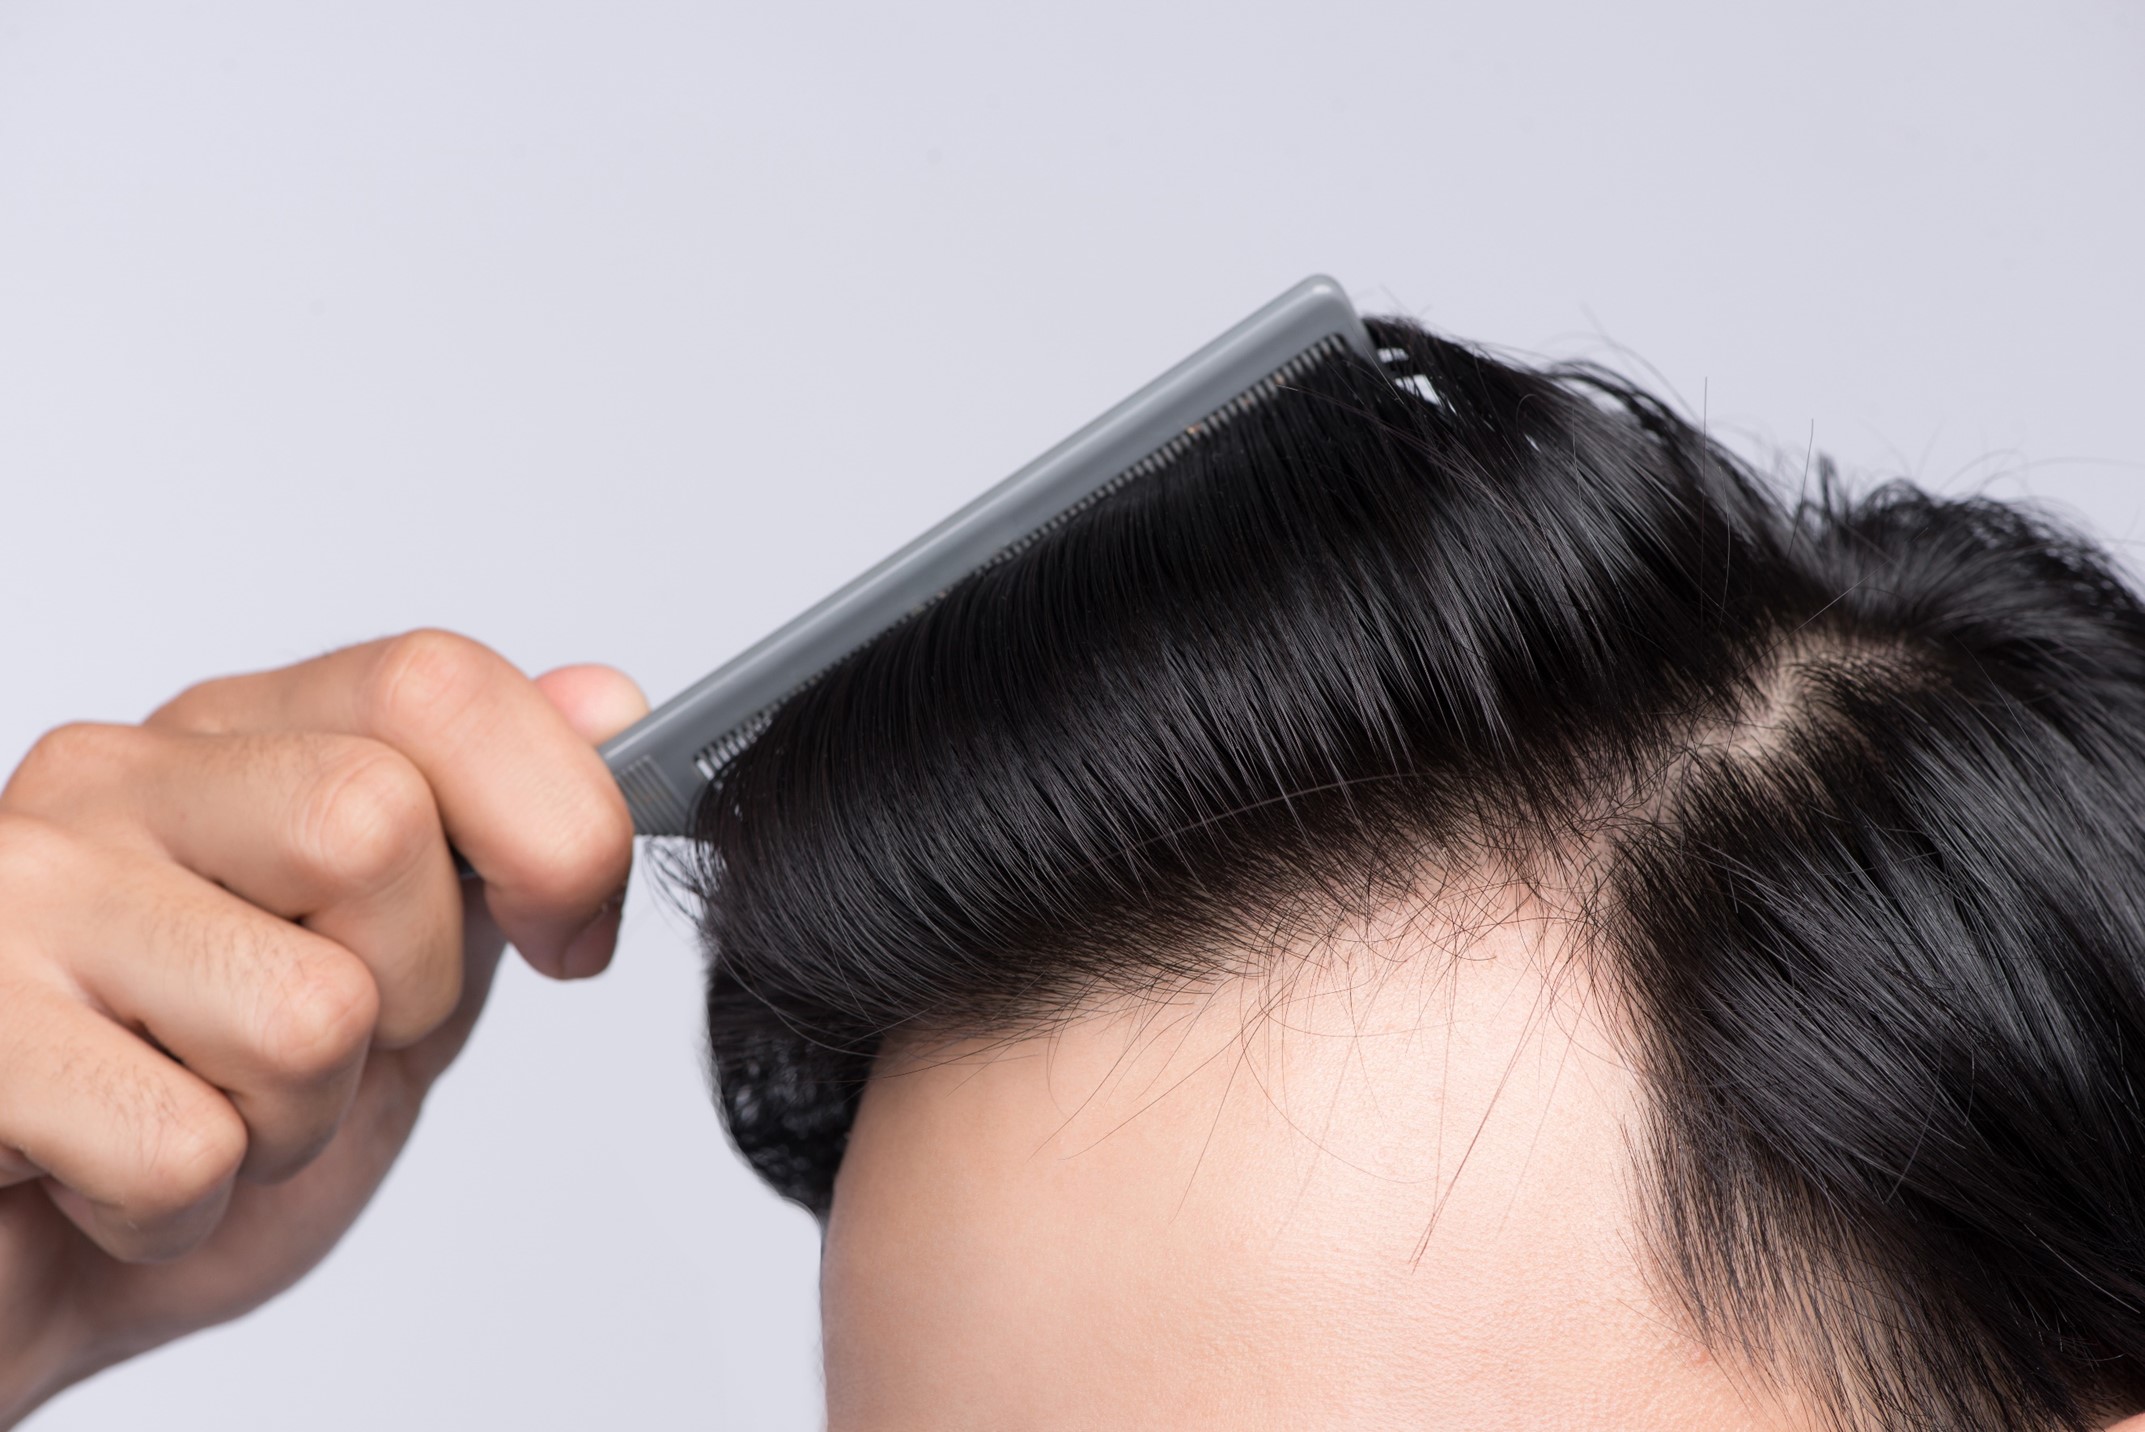 prevent excessive brushing to control oily scalp